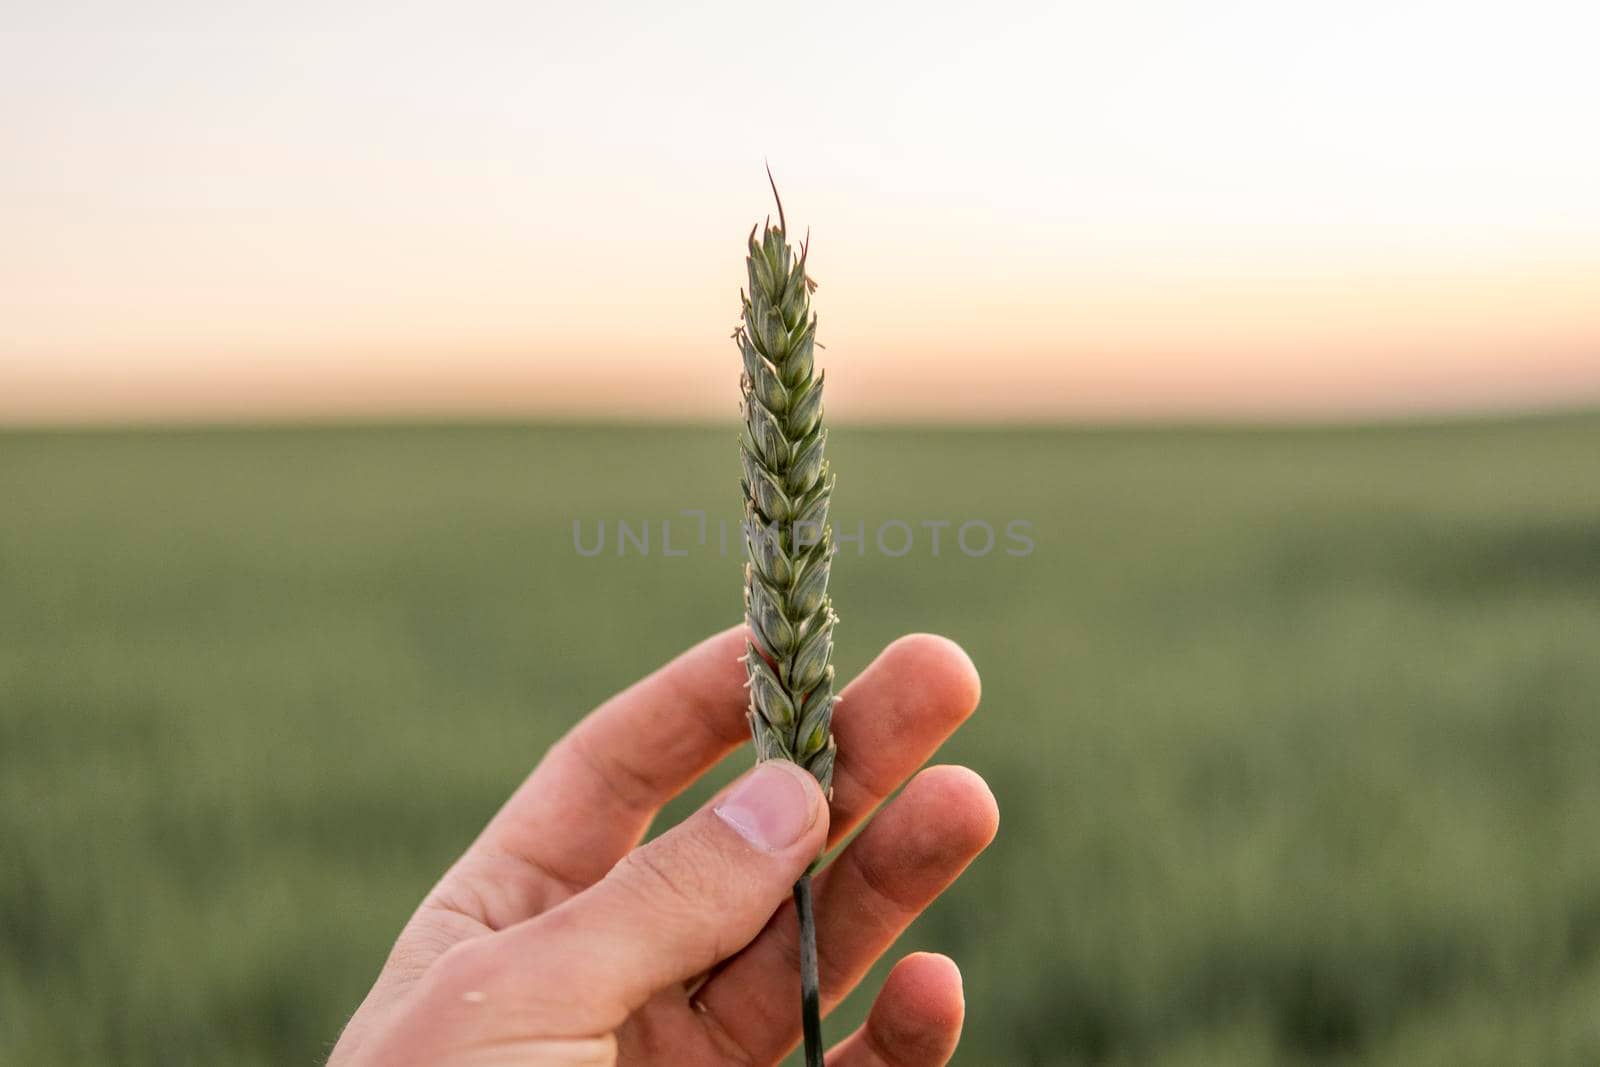 Farmer is holding a green ear of wheat in hand in front of agricultural field of wheat in a sunset